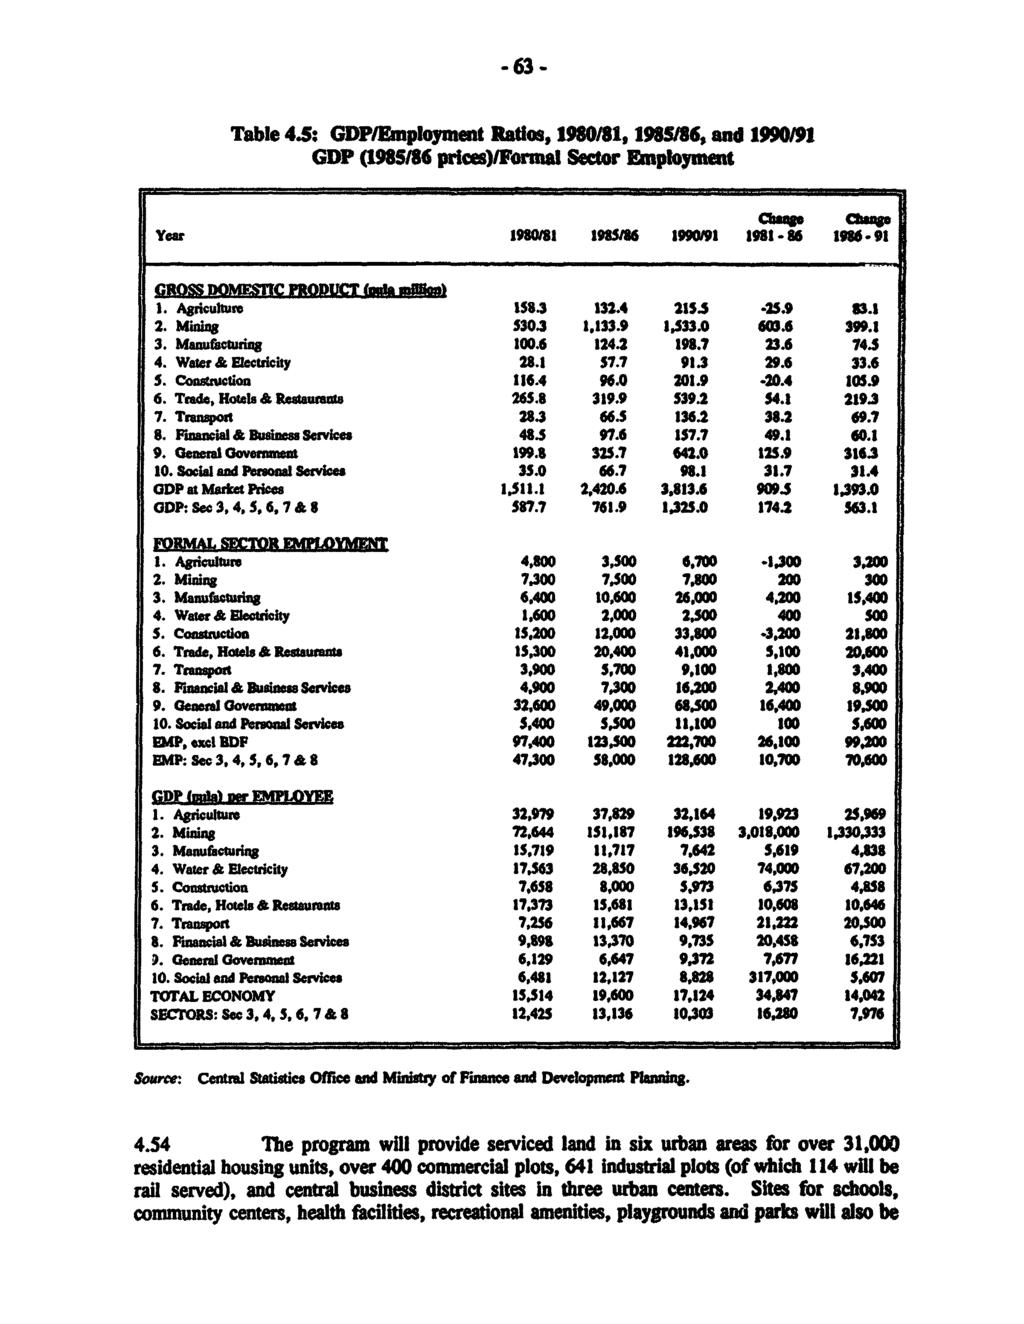 -63 - Table 4.: GDPEunployment Ratios, 1980/81, 19MI6, and 1990I/1 GDP (1985186 prices)/forial Sector Enploymt 2, Mining530.3 1_133.9 -,533.0 60'.6 399.1 3. Manurfauing 100.6 124.2 198.7 23.6 t74.s 4.